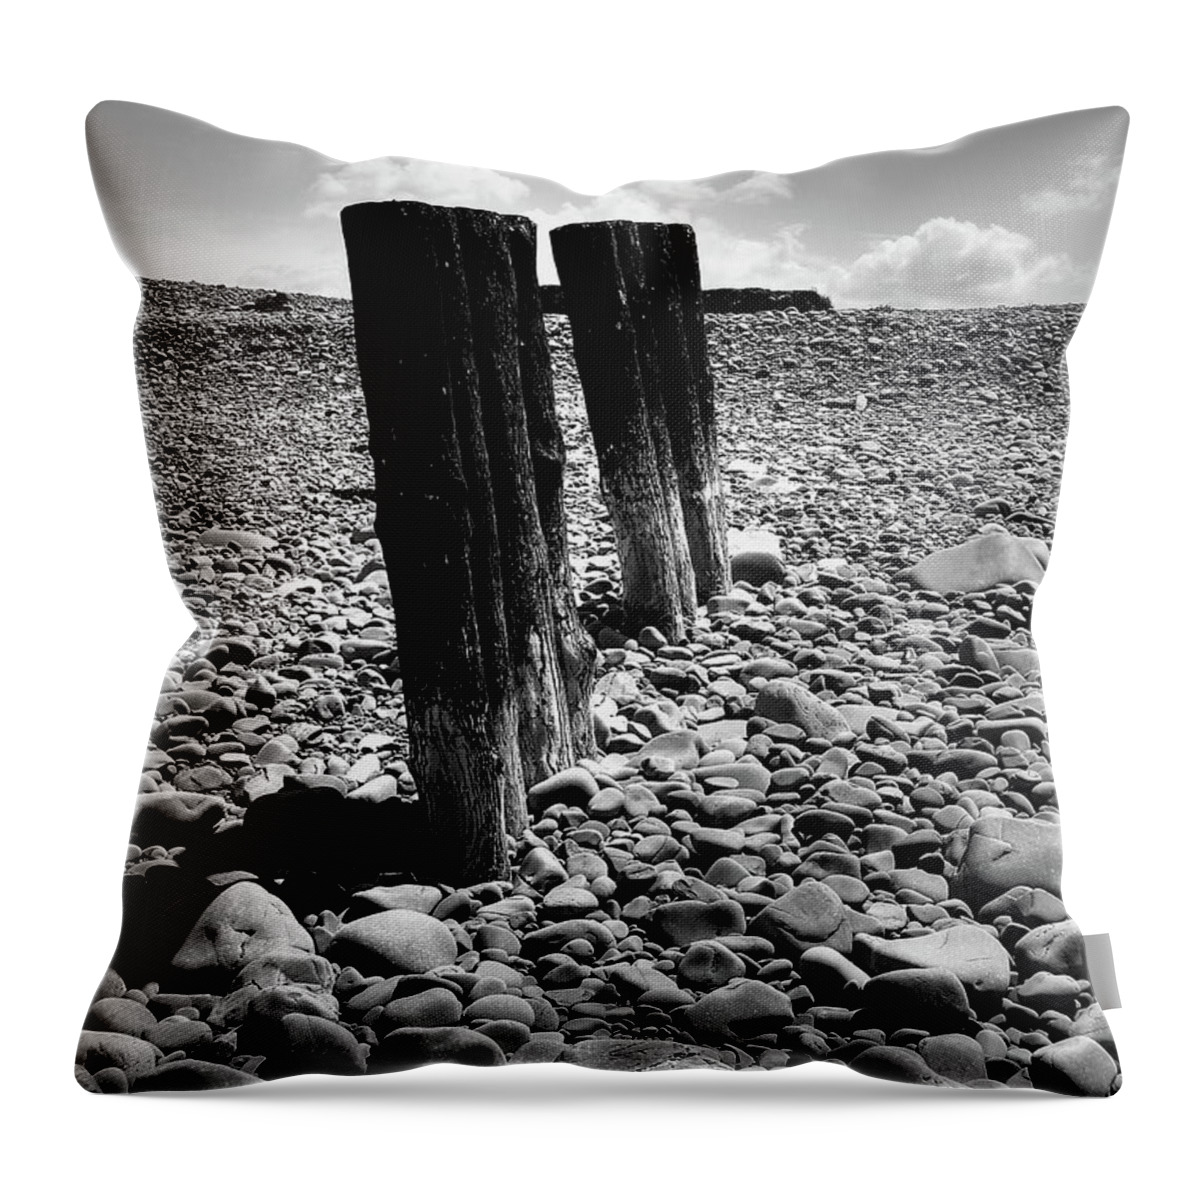 Groynes Throw Pillow featuring the photograph Pebbles and Groynes monochrome by Jeff Townsend